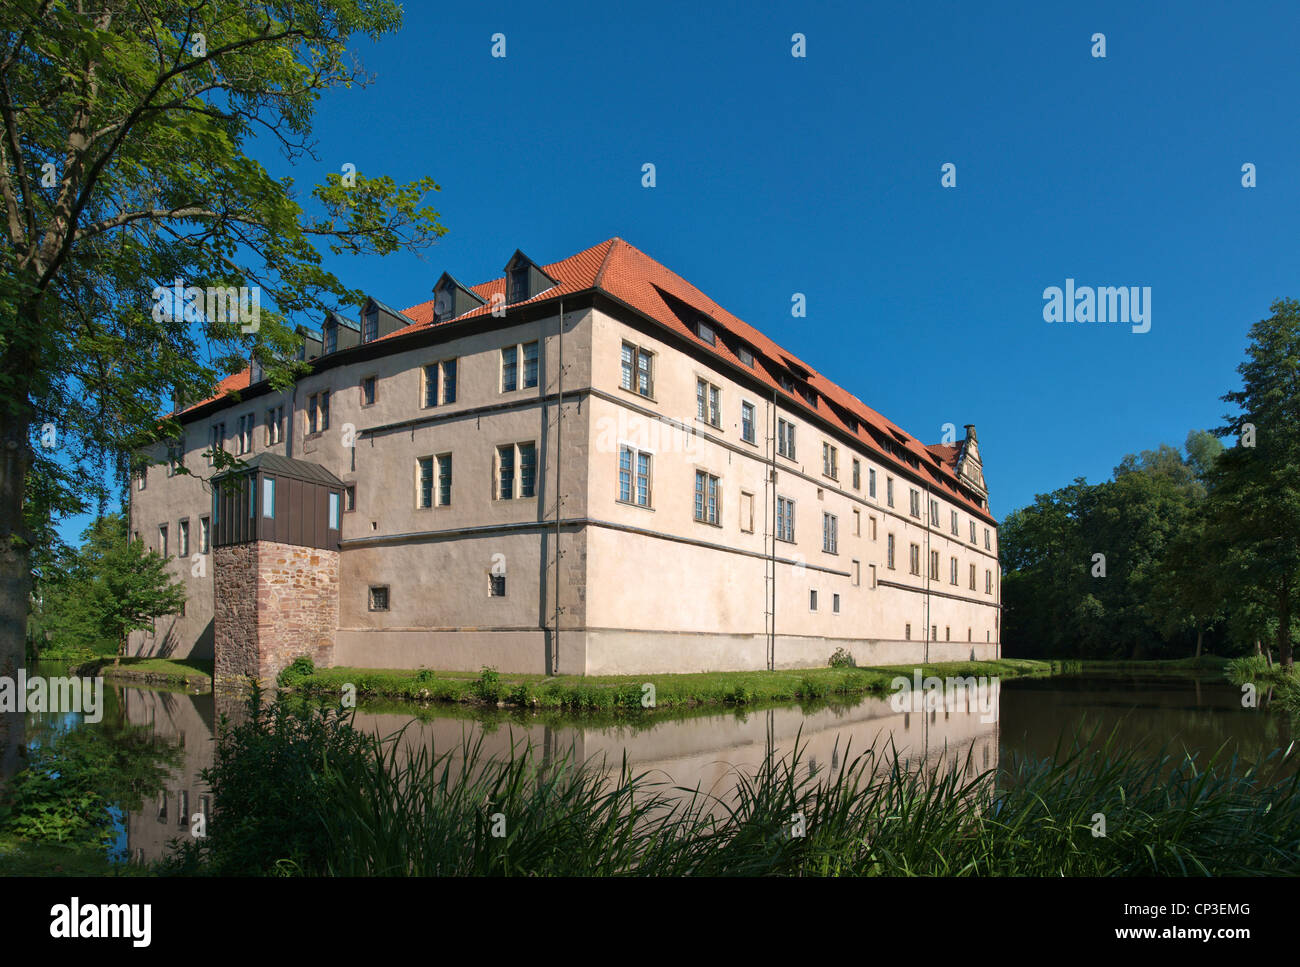 Brake castle with moat in Lemgo, built in the renaissance style from 1587 on as the residence of the Counts zur Lippe. Stock Photo